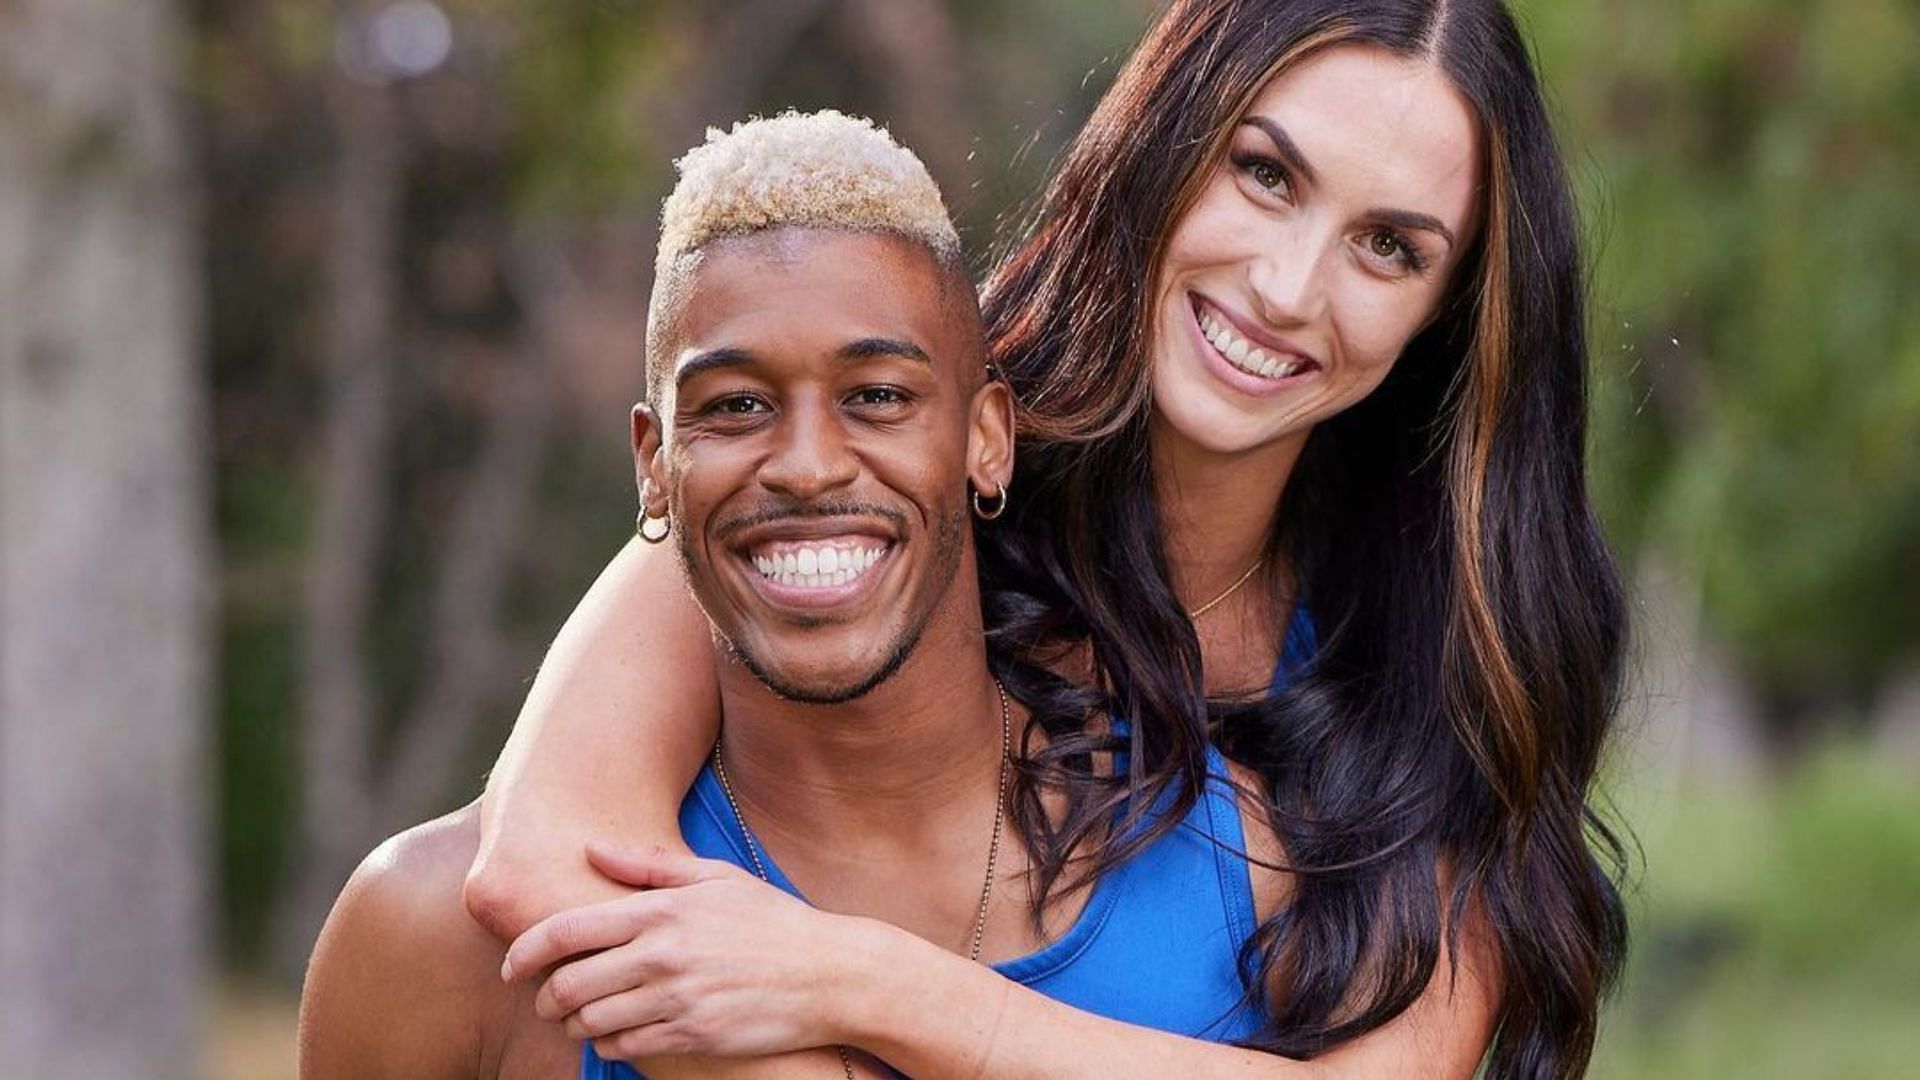 Mattie and Quinton from The Amazing Race (Image via Instagram/@itsaquintonthing)